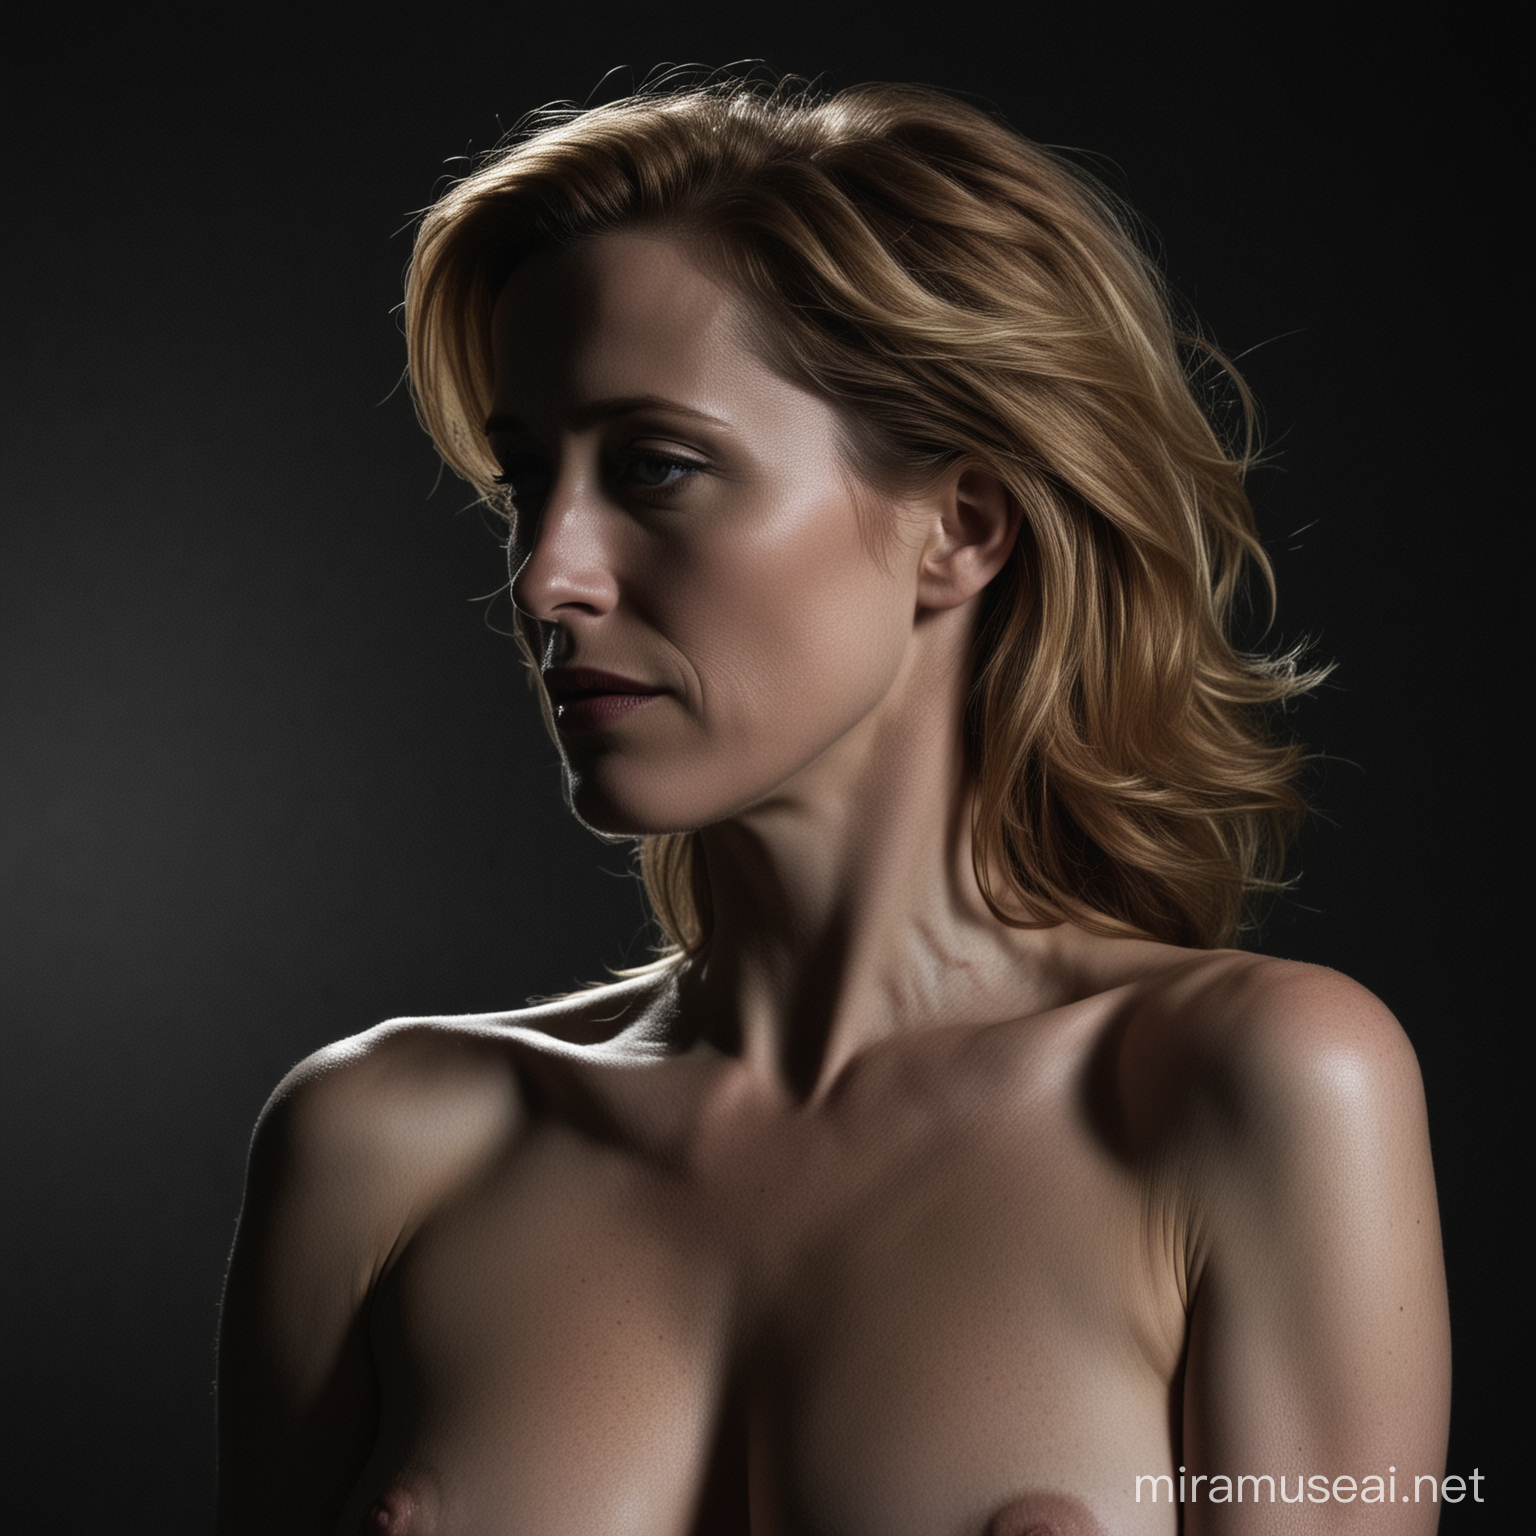 Elegant Silhouette of Gillian Anderson Lost in Thought Against Dark Background